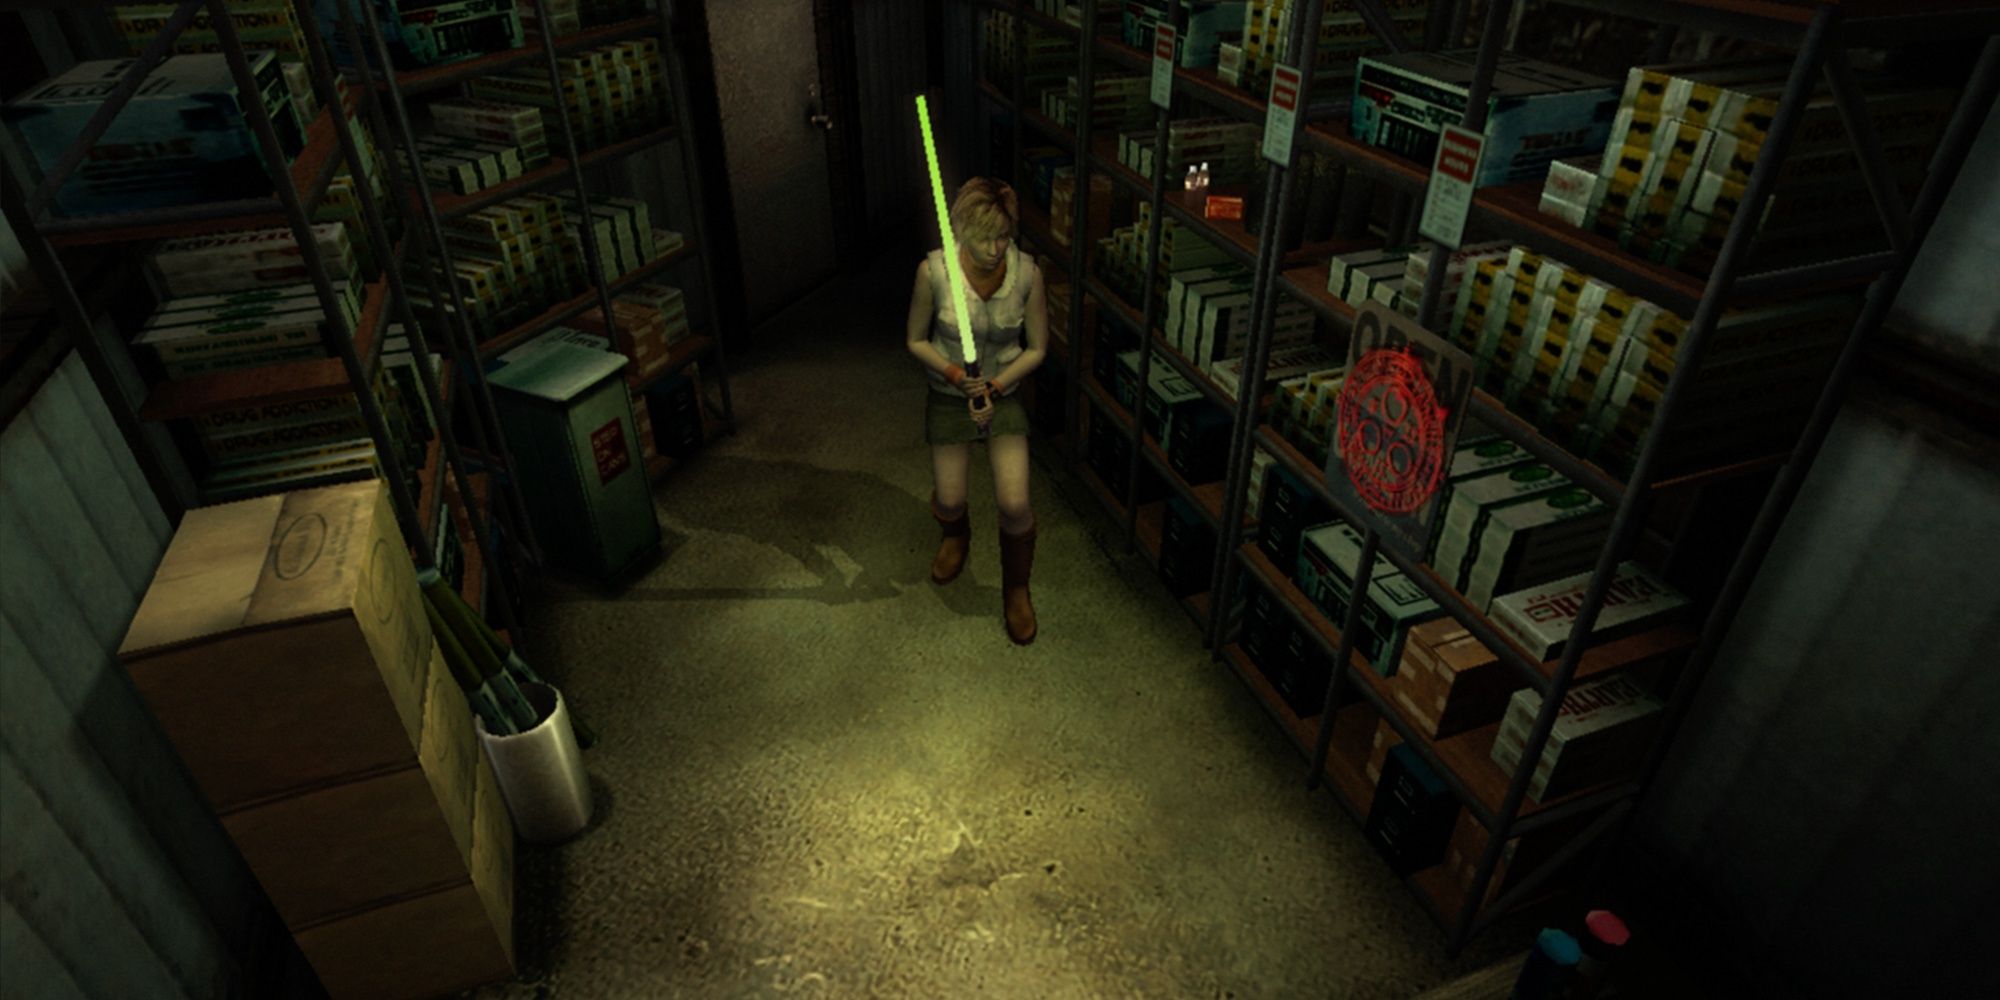 Heather wielding the Beam Saber from Silent Hill 3.